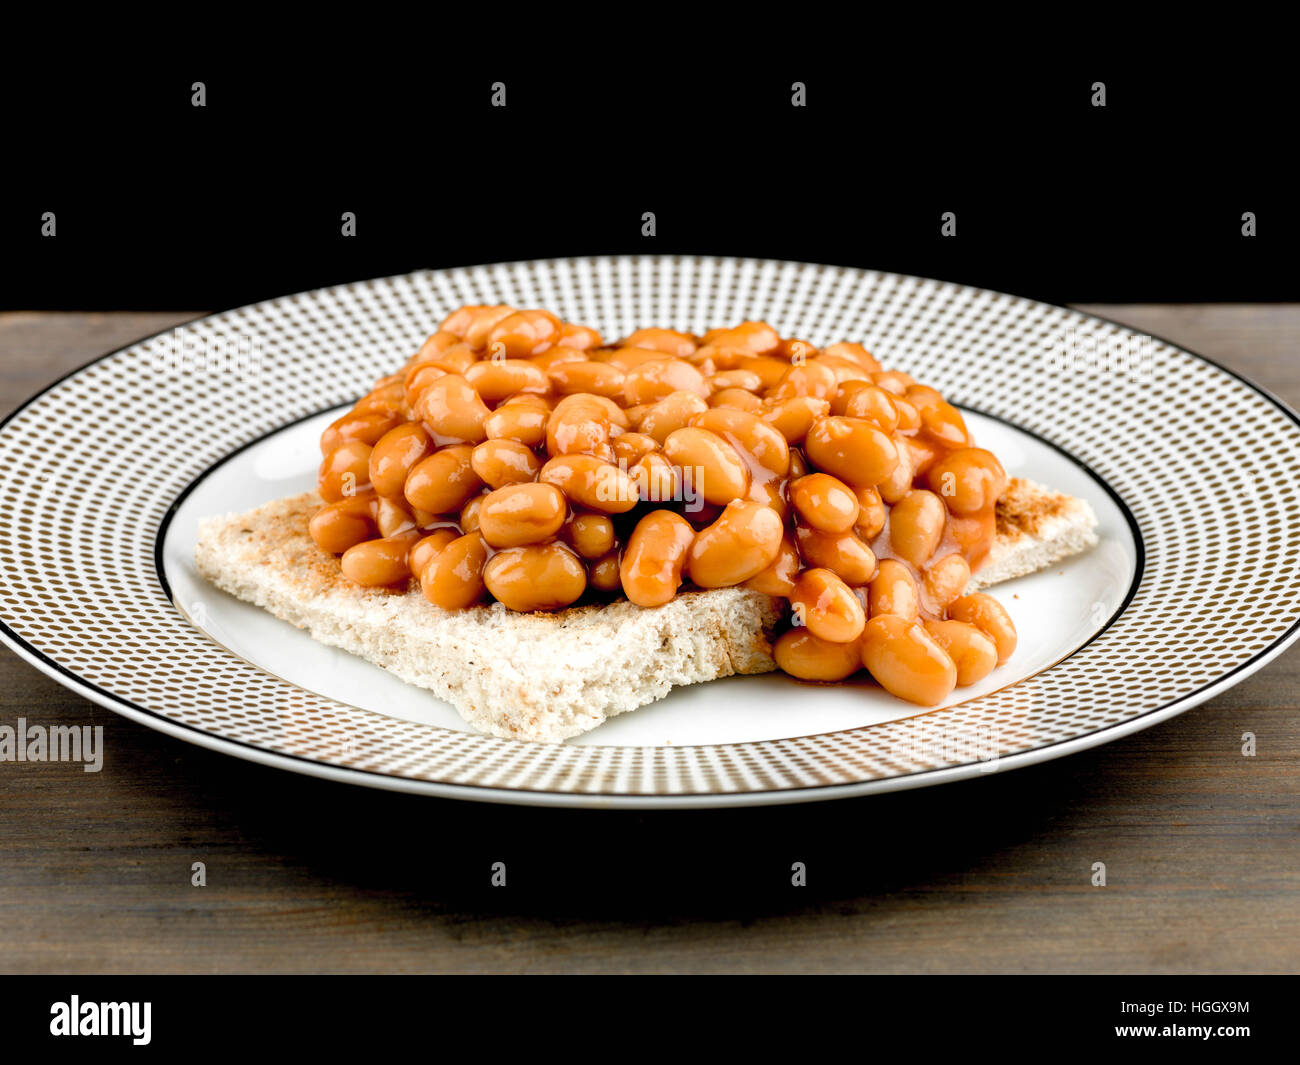 Breakfast or Snack of Baked Beans on Toast Stock Photo